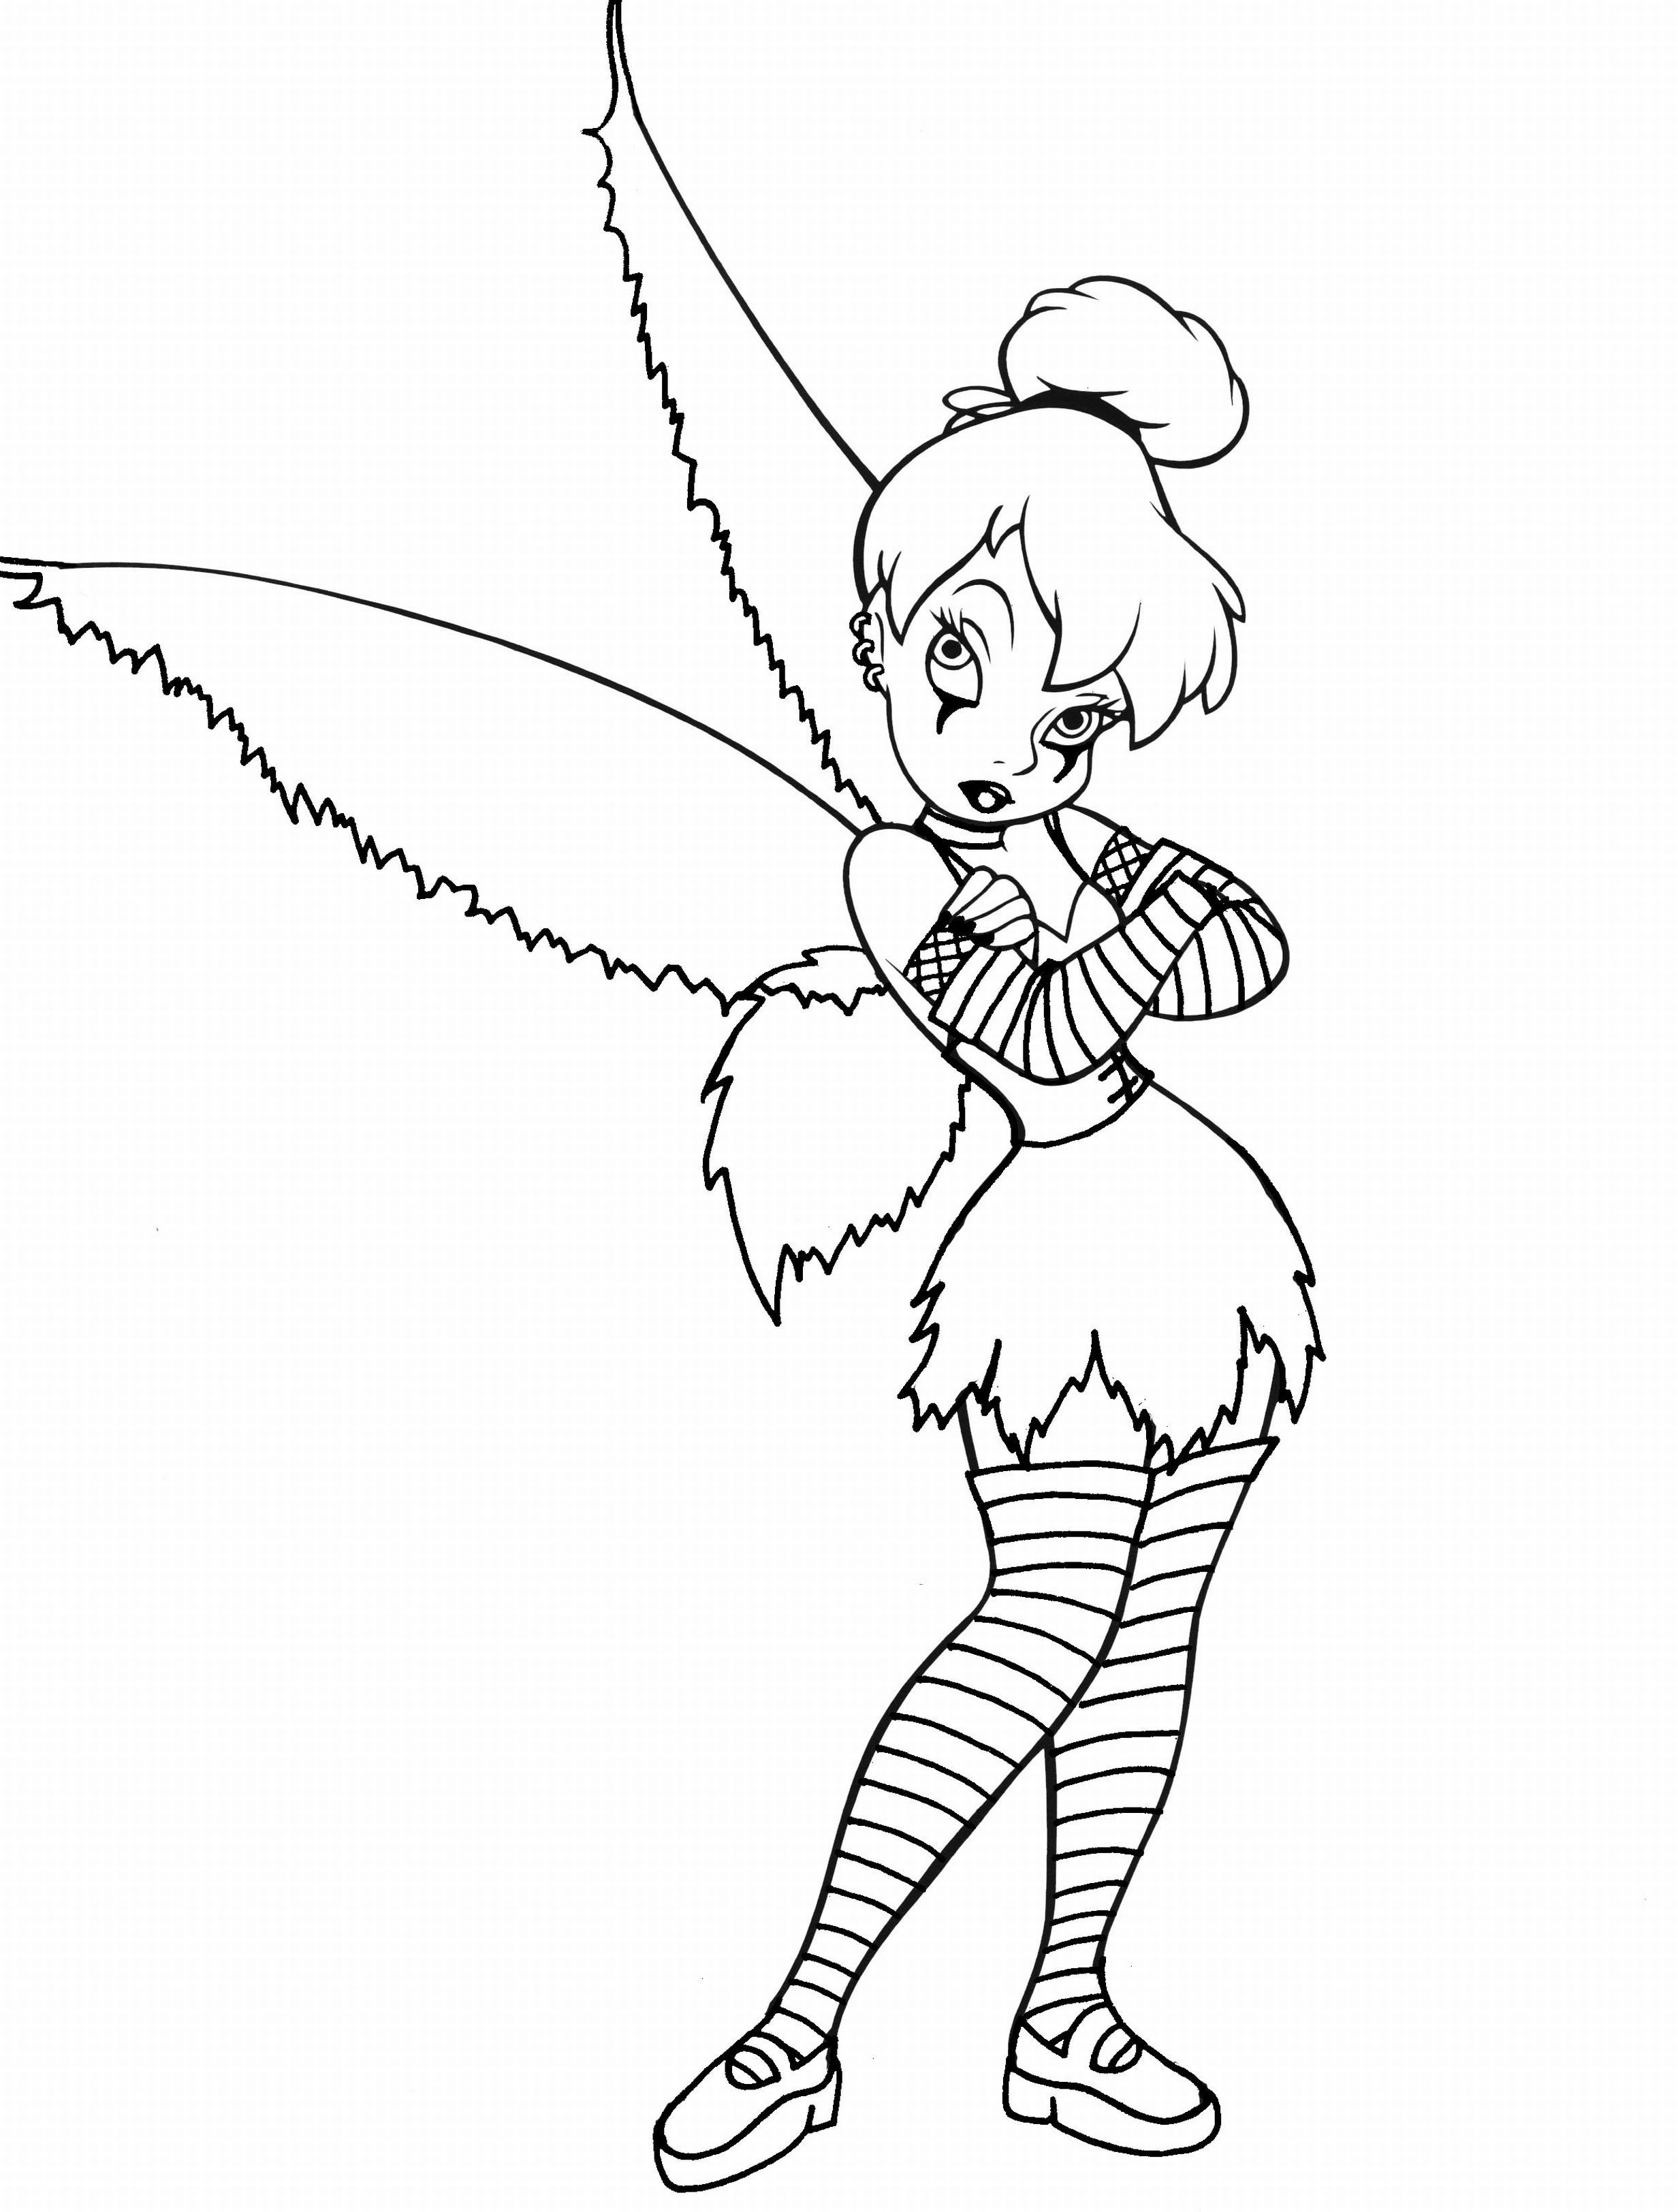 Free Printable Tinkerbell Coloring Pages For Kids | Princess Pic - Tinkerbell Coloring Pages Printable Free